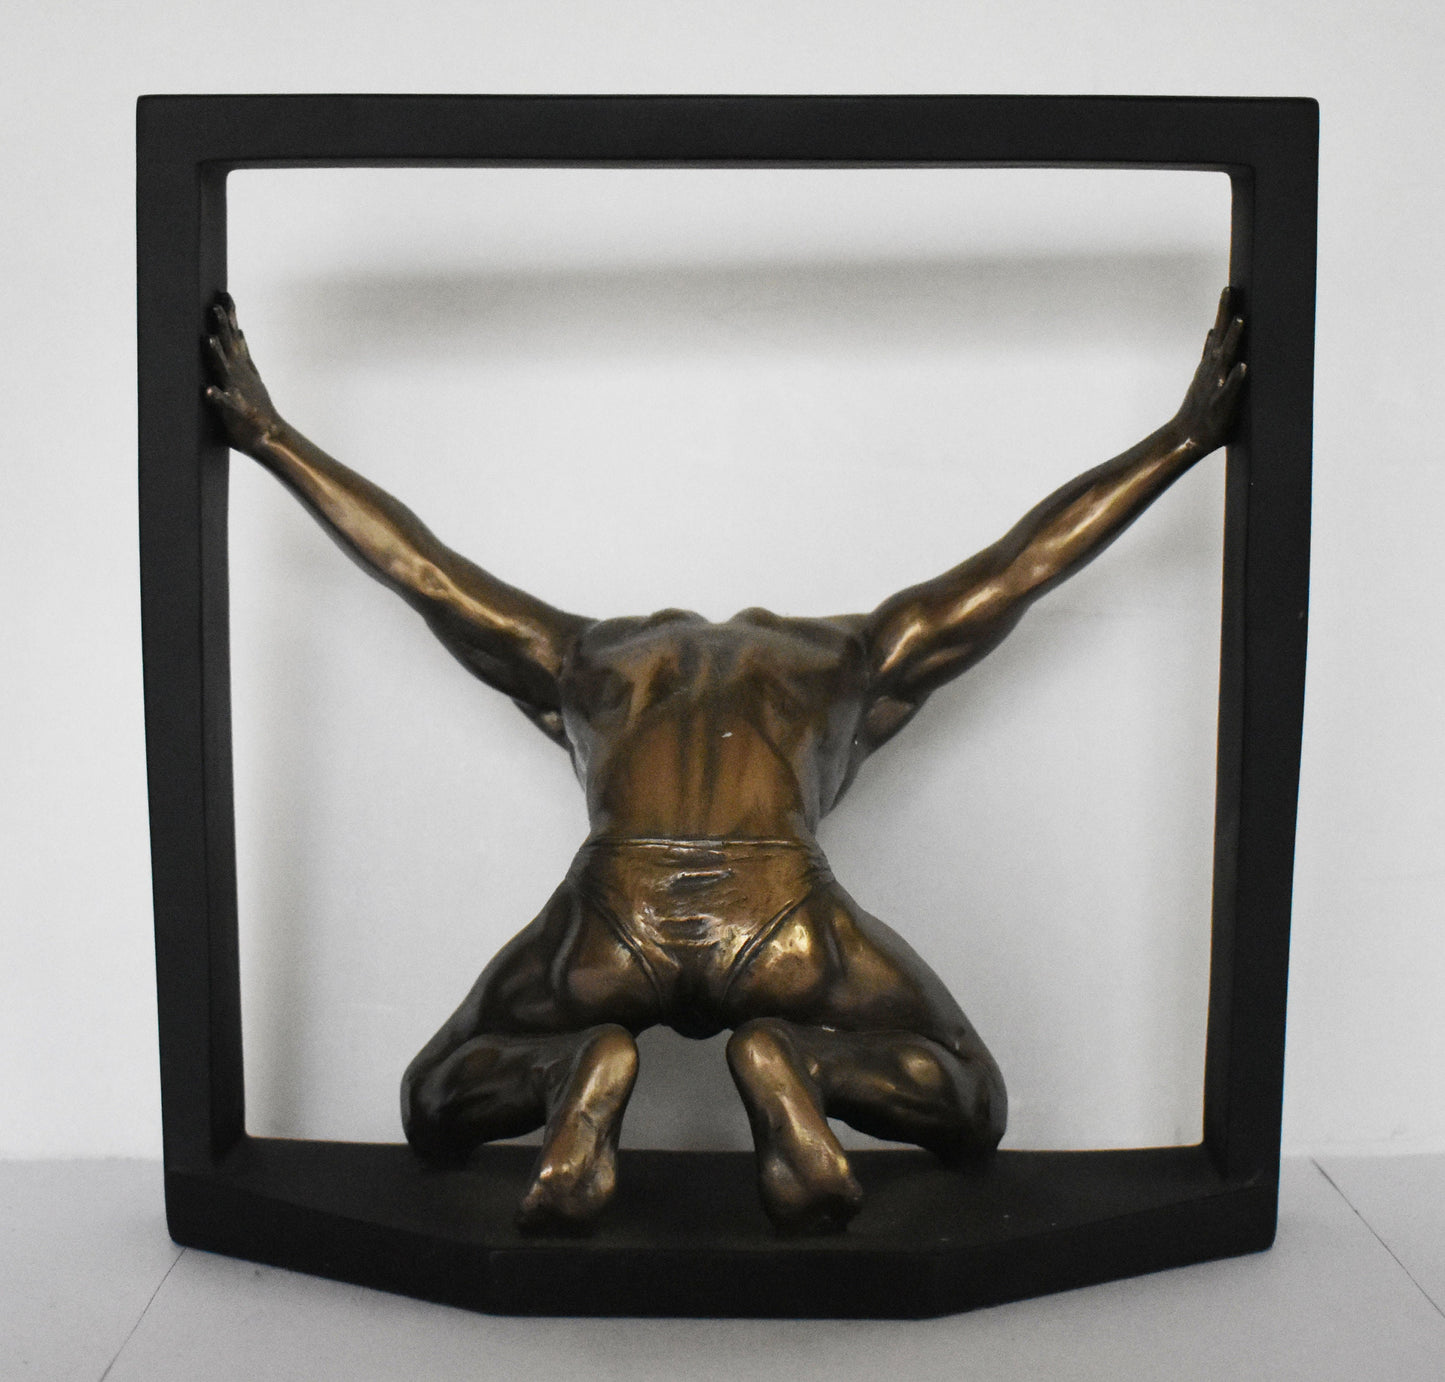 Naked Male Statue - Erotic Art - Sexy Pose - Beautiful Man - Hot Body - Desire and Love - Cold Cast Bronze Resin